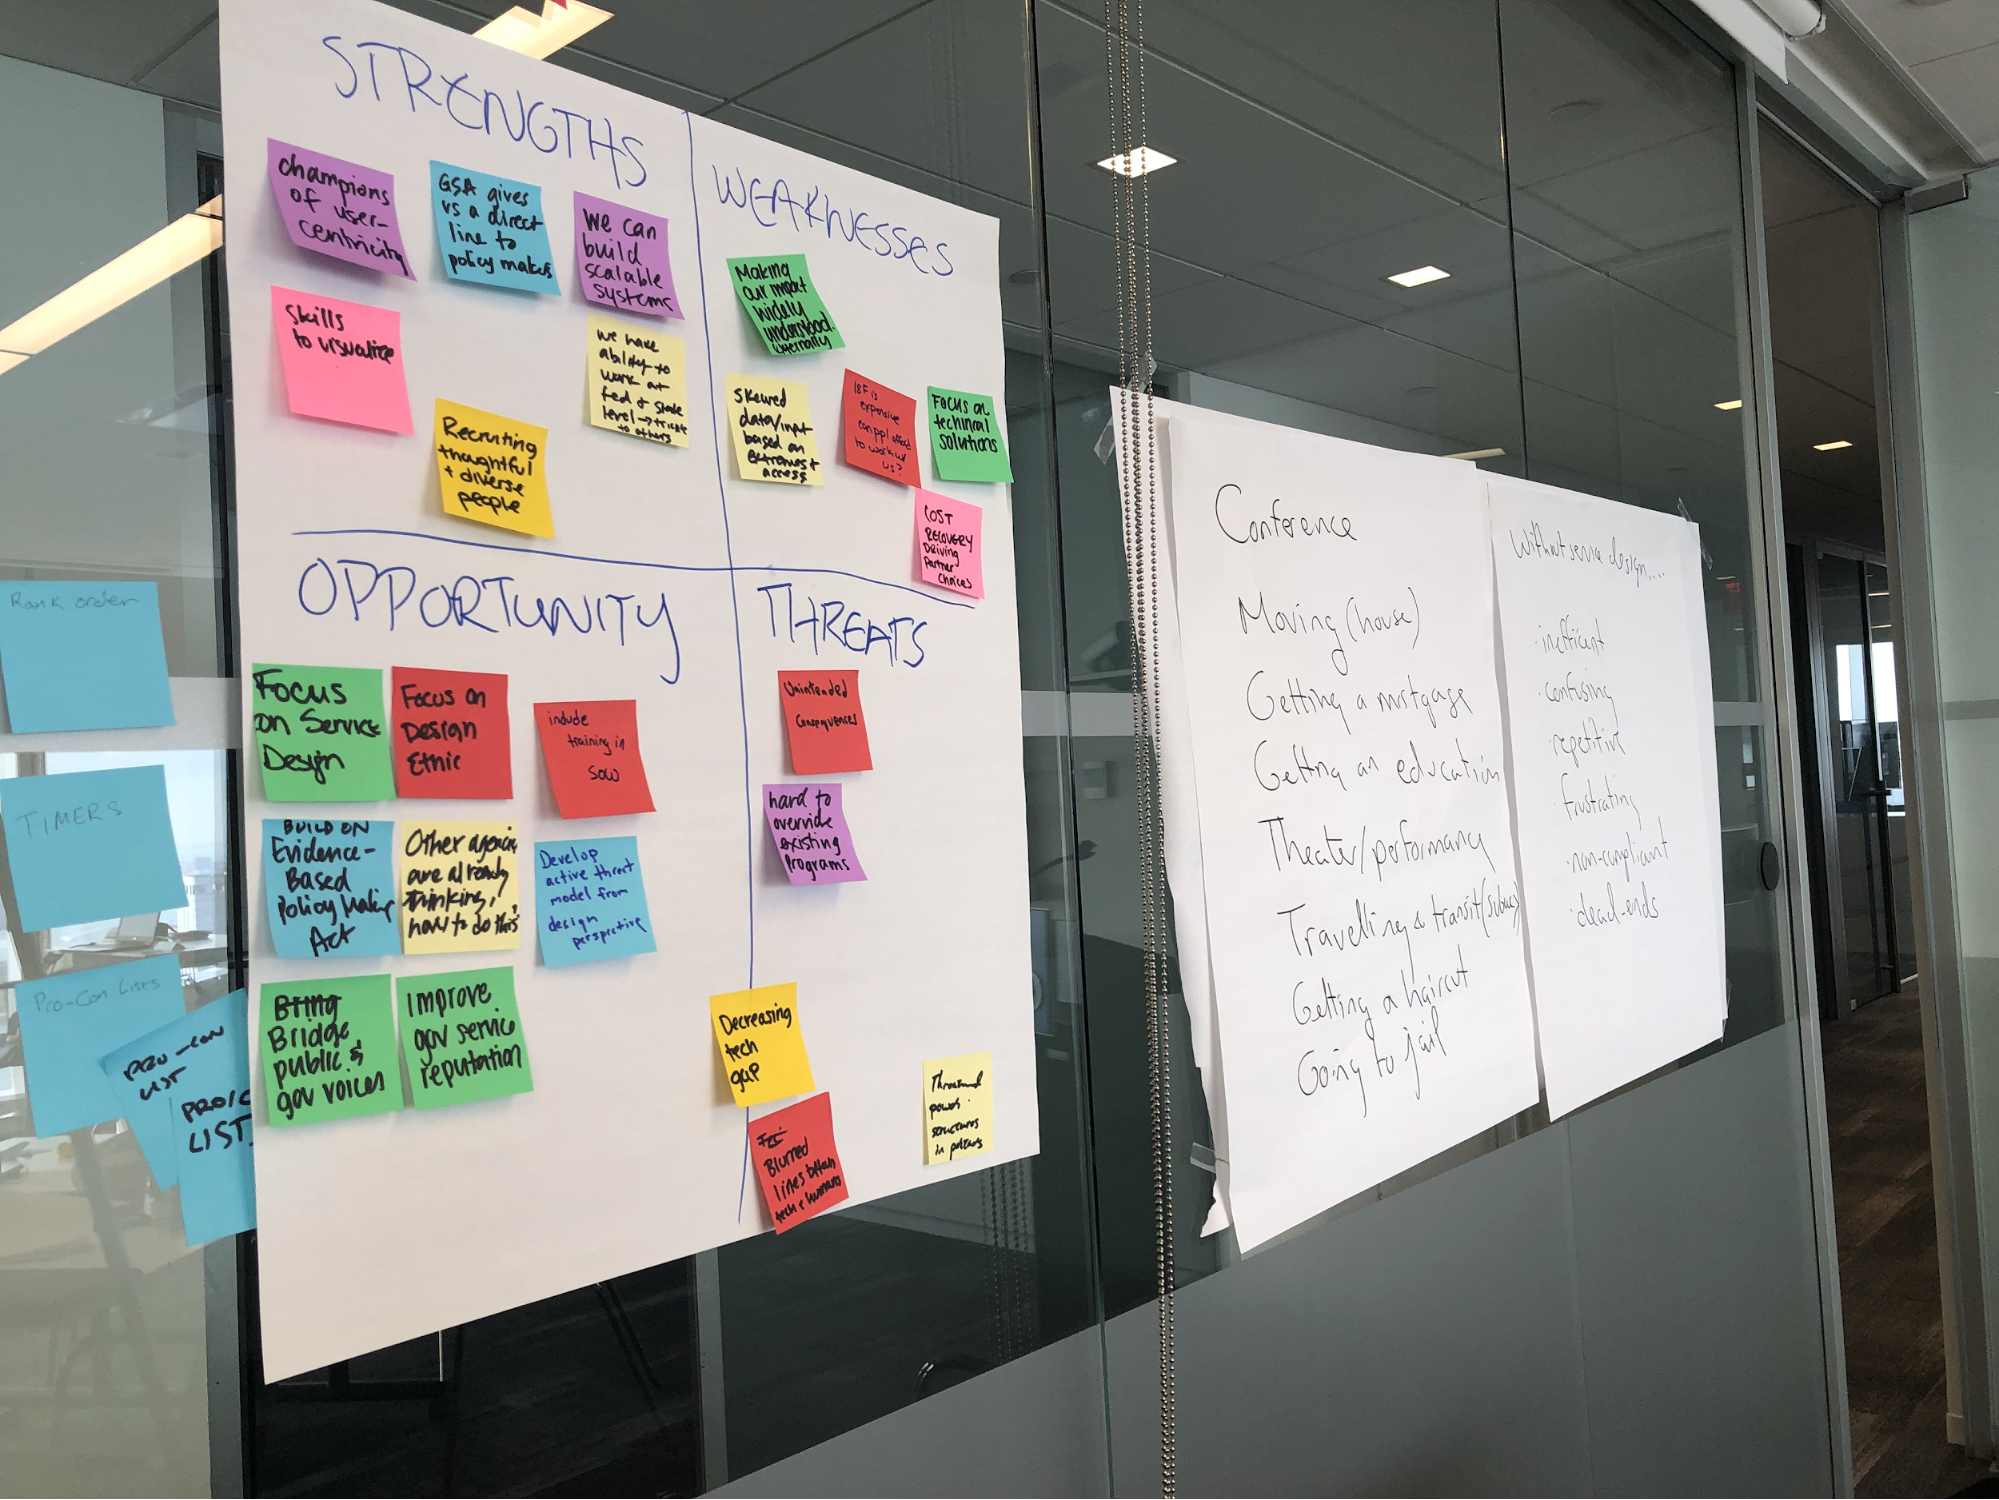 A wall covered with handwritten notes from a project brainstorming session with a large team. The image focuses on the team's notes on the project's strengths, weaknesses, opportunities, and threats.